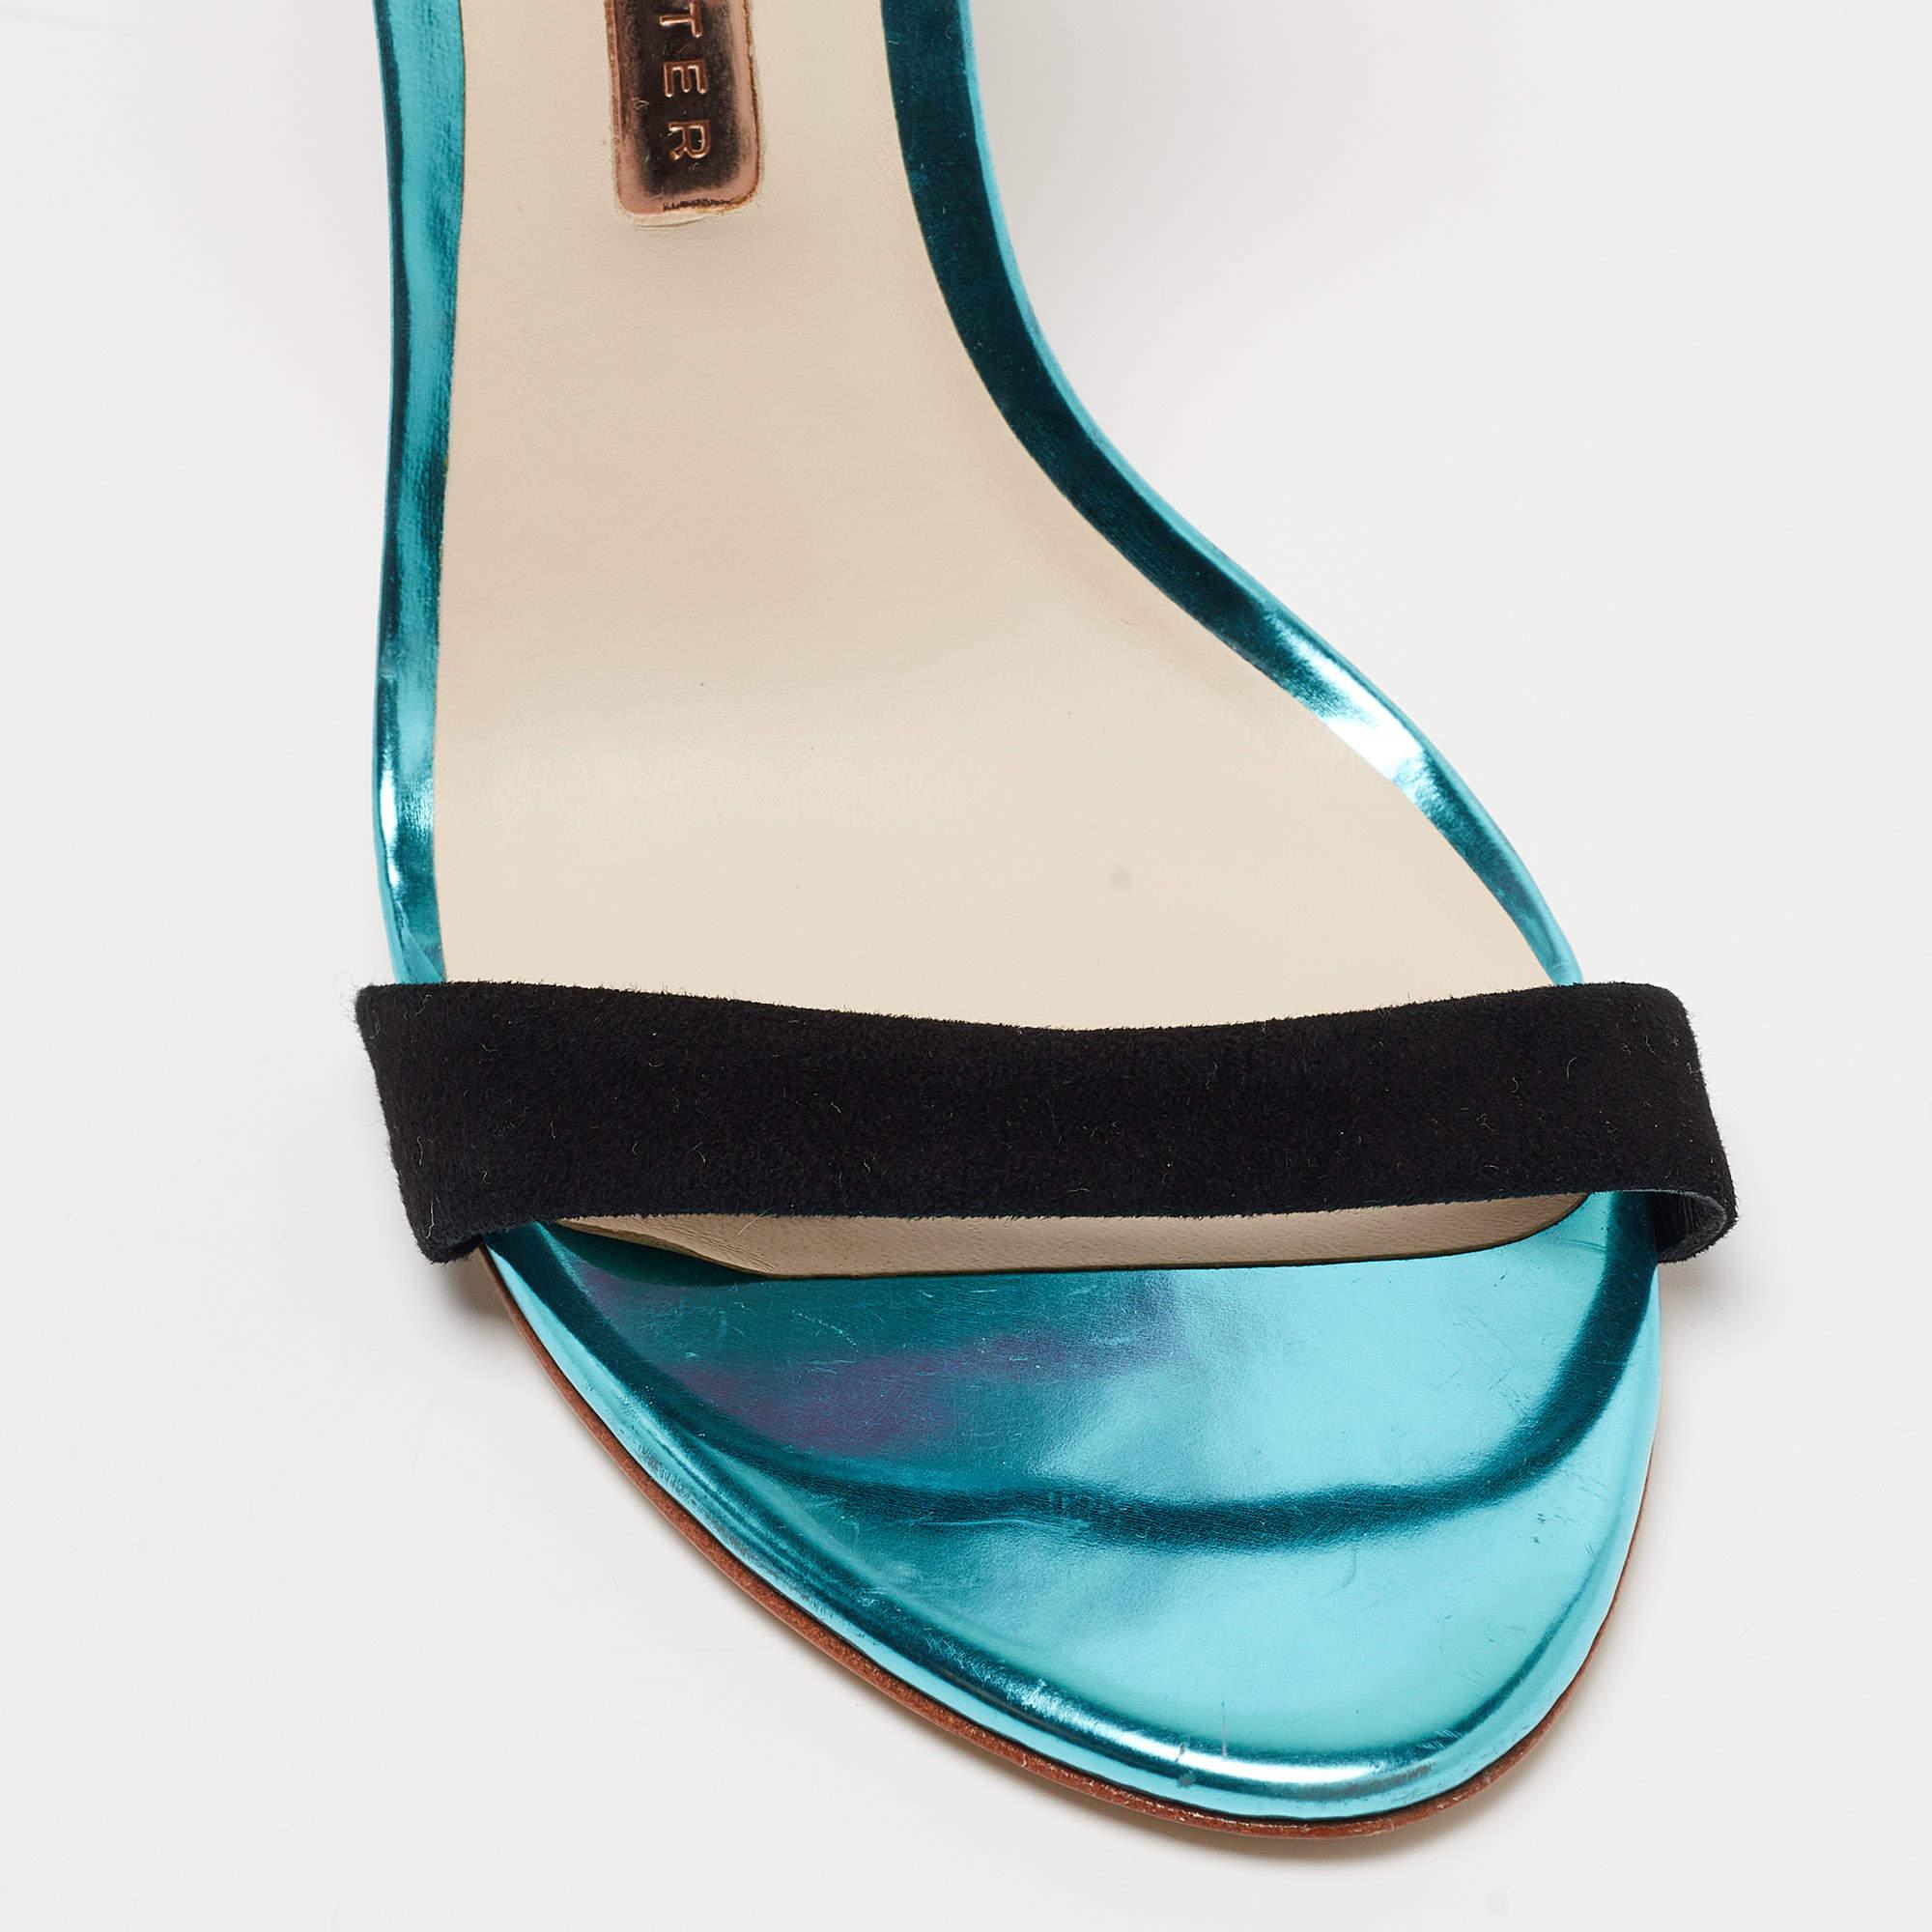 Sophia Webster Multicolor Patent Leather and Suede Chiara Butterfly Ankle Strap  For Sale 1